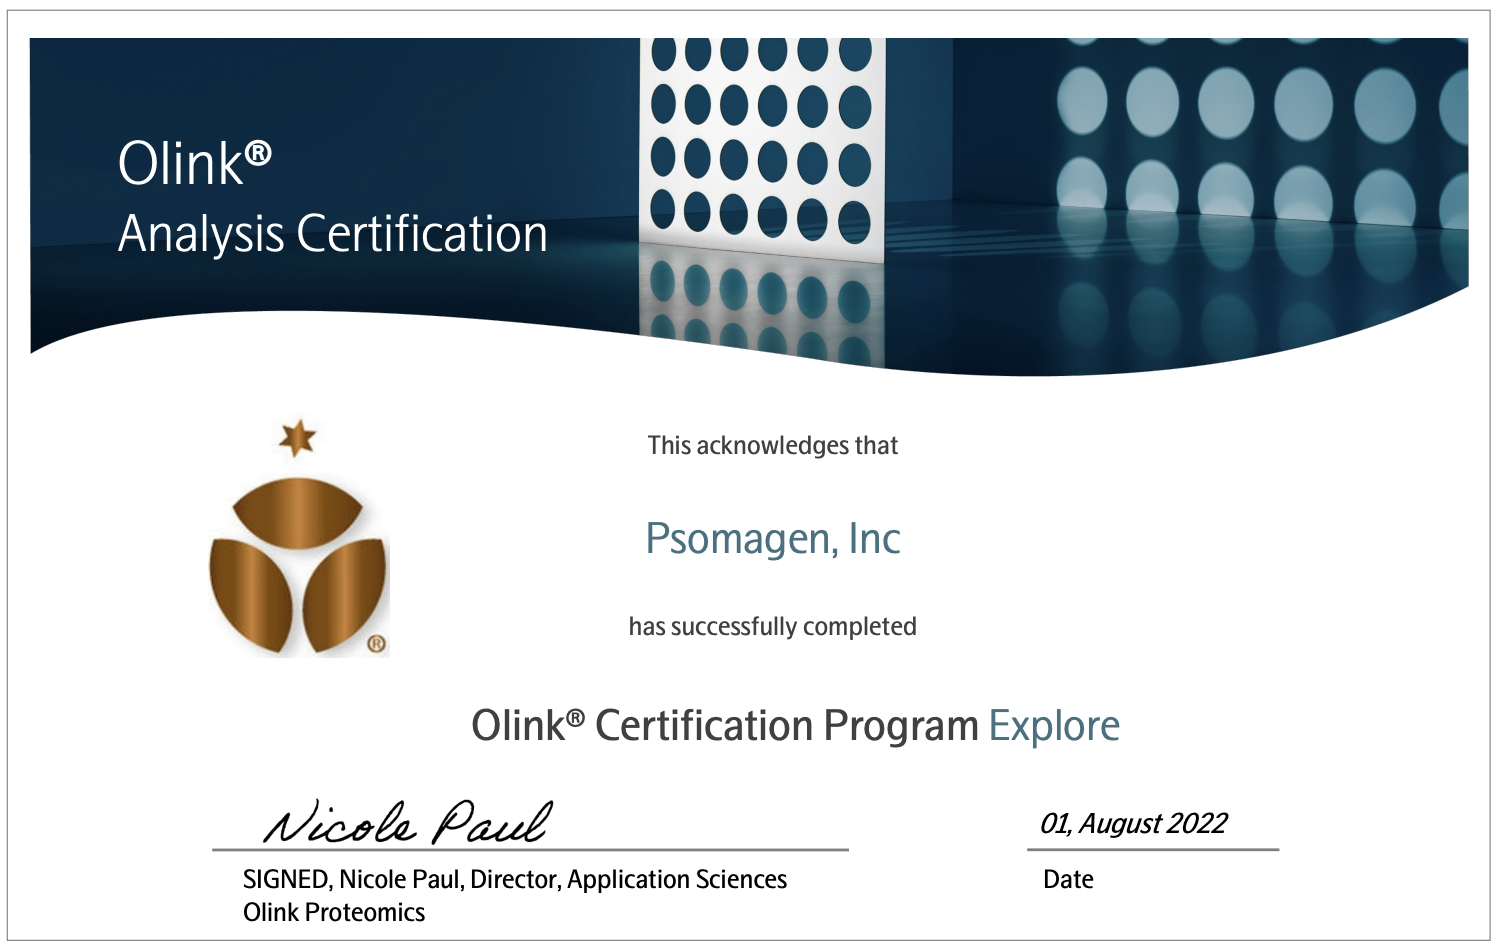 Ollink® Certification - Explore acquired August 2022